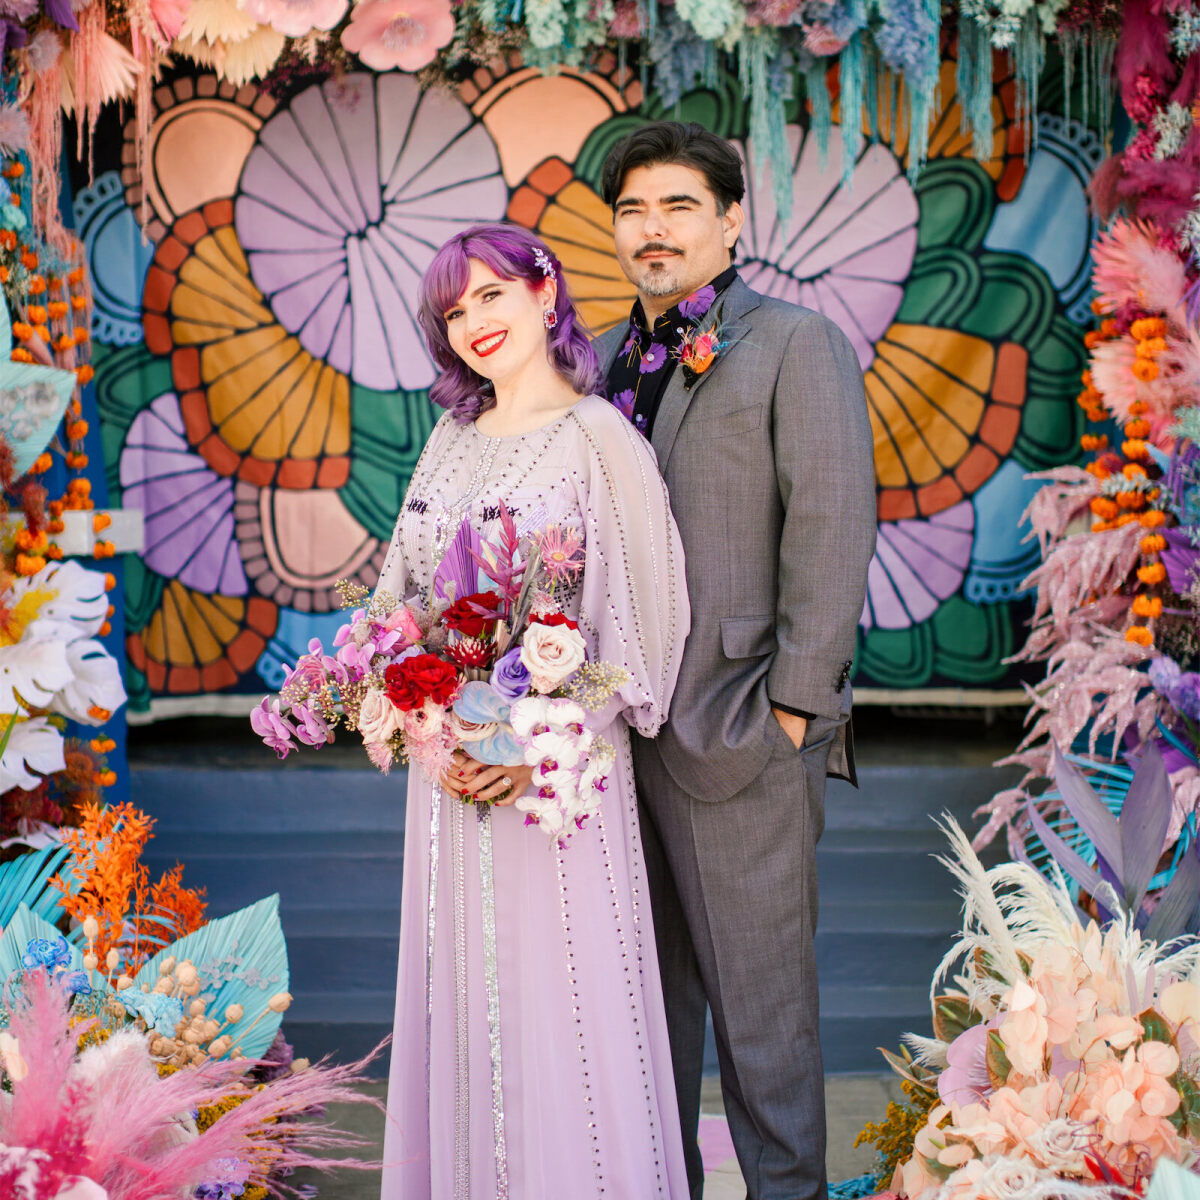 Punk Meets Boho in this Bright + Colorful Elopement Wedding Styled